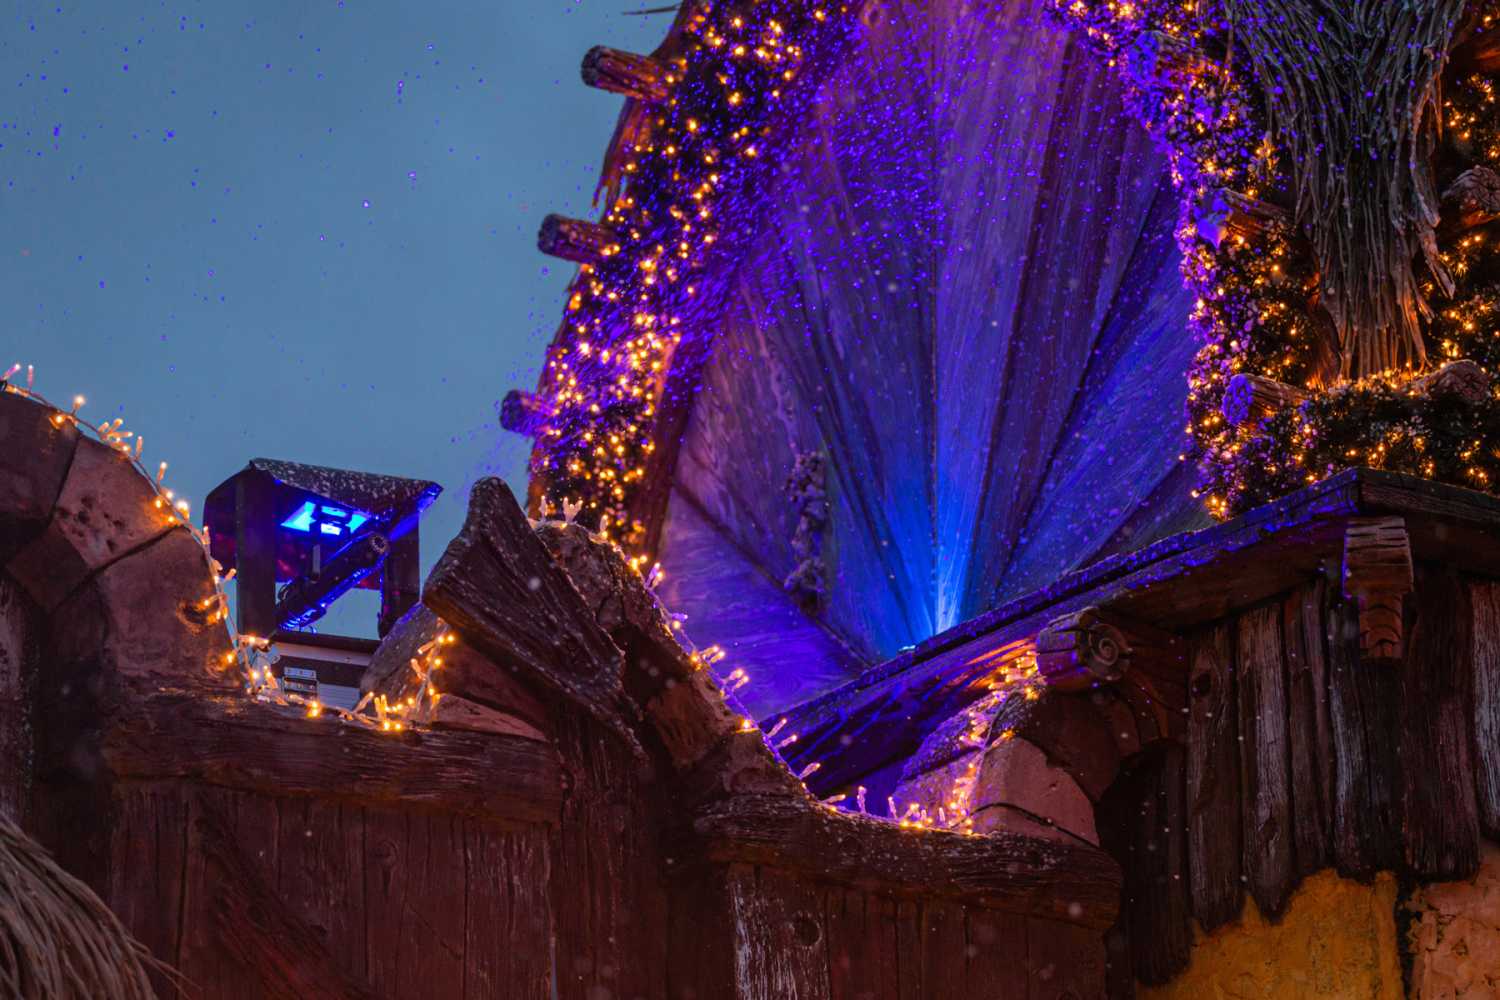 The Dutch theme park offered visitors a magical winter wonderland.